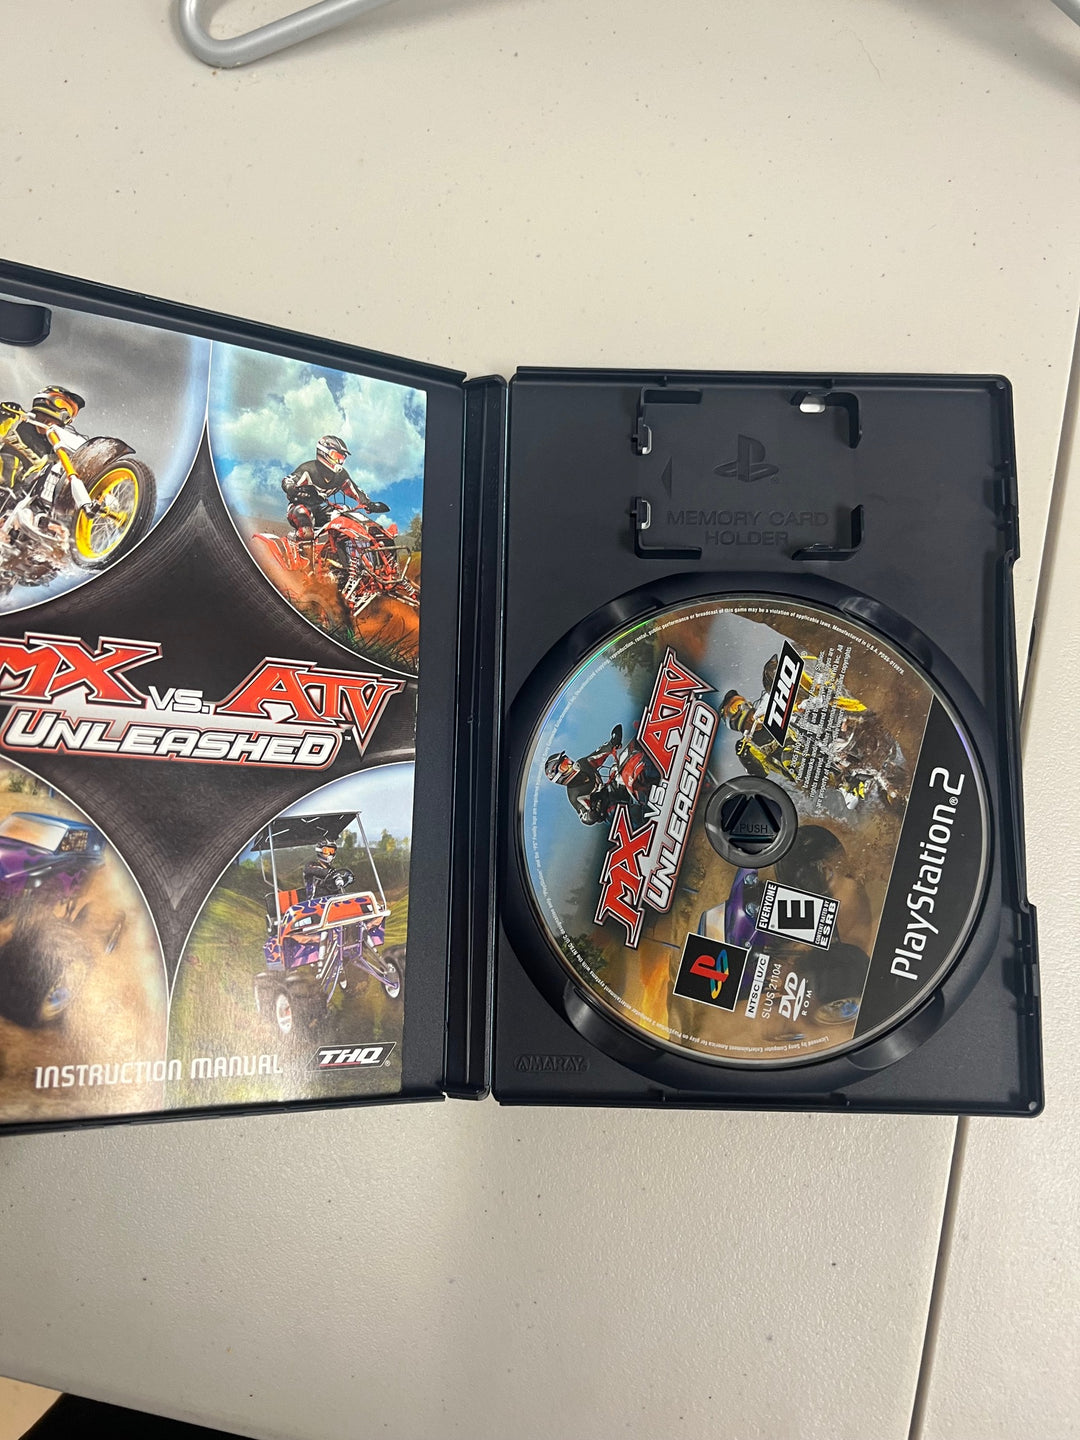 MX vs ATV Unleashed for Playstation 2 PS2 in case. Tested and Working.     DO63024